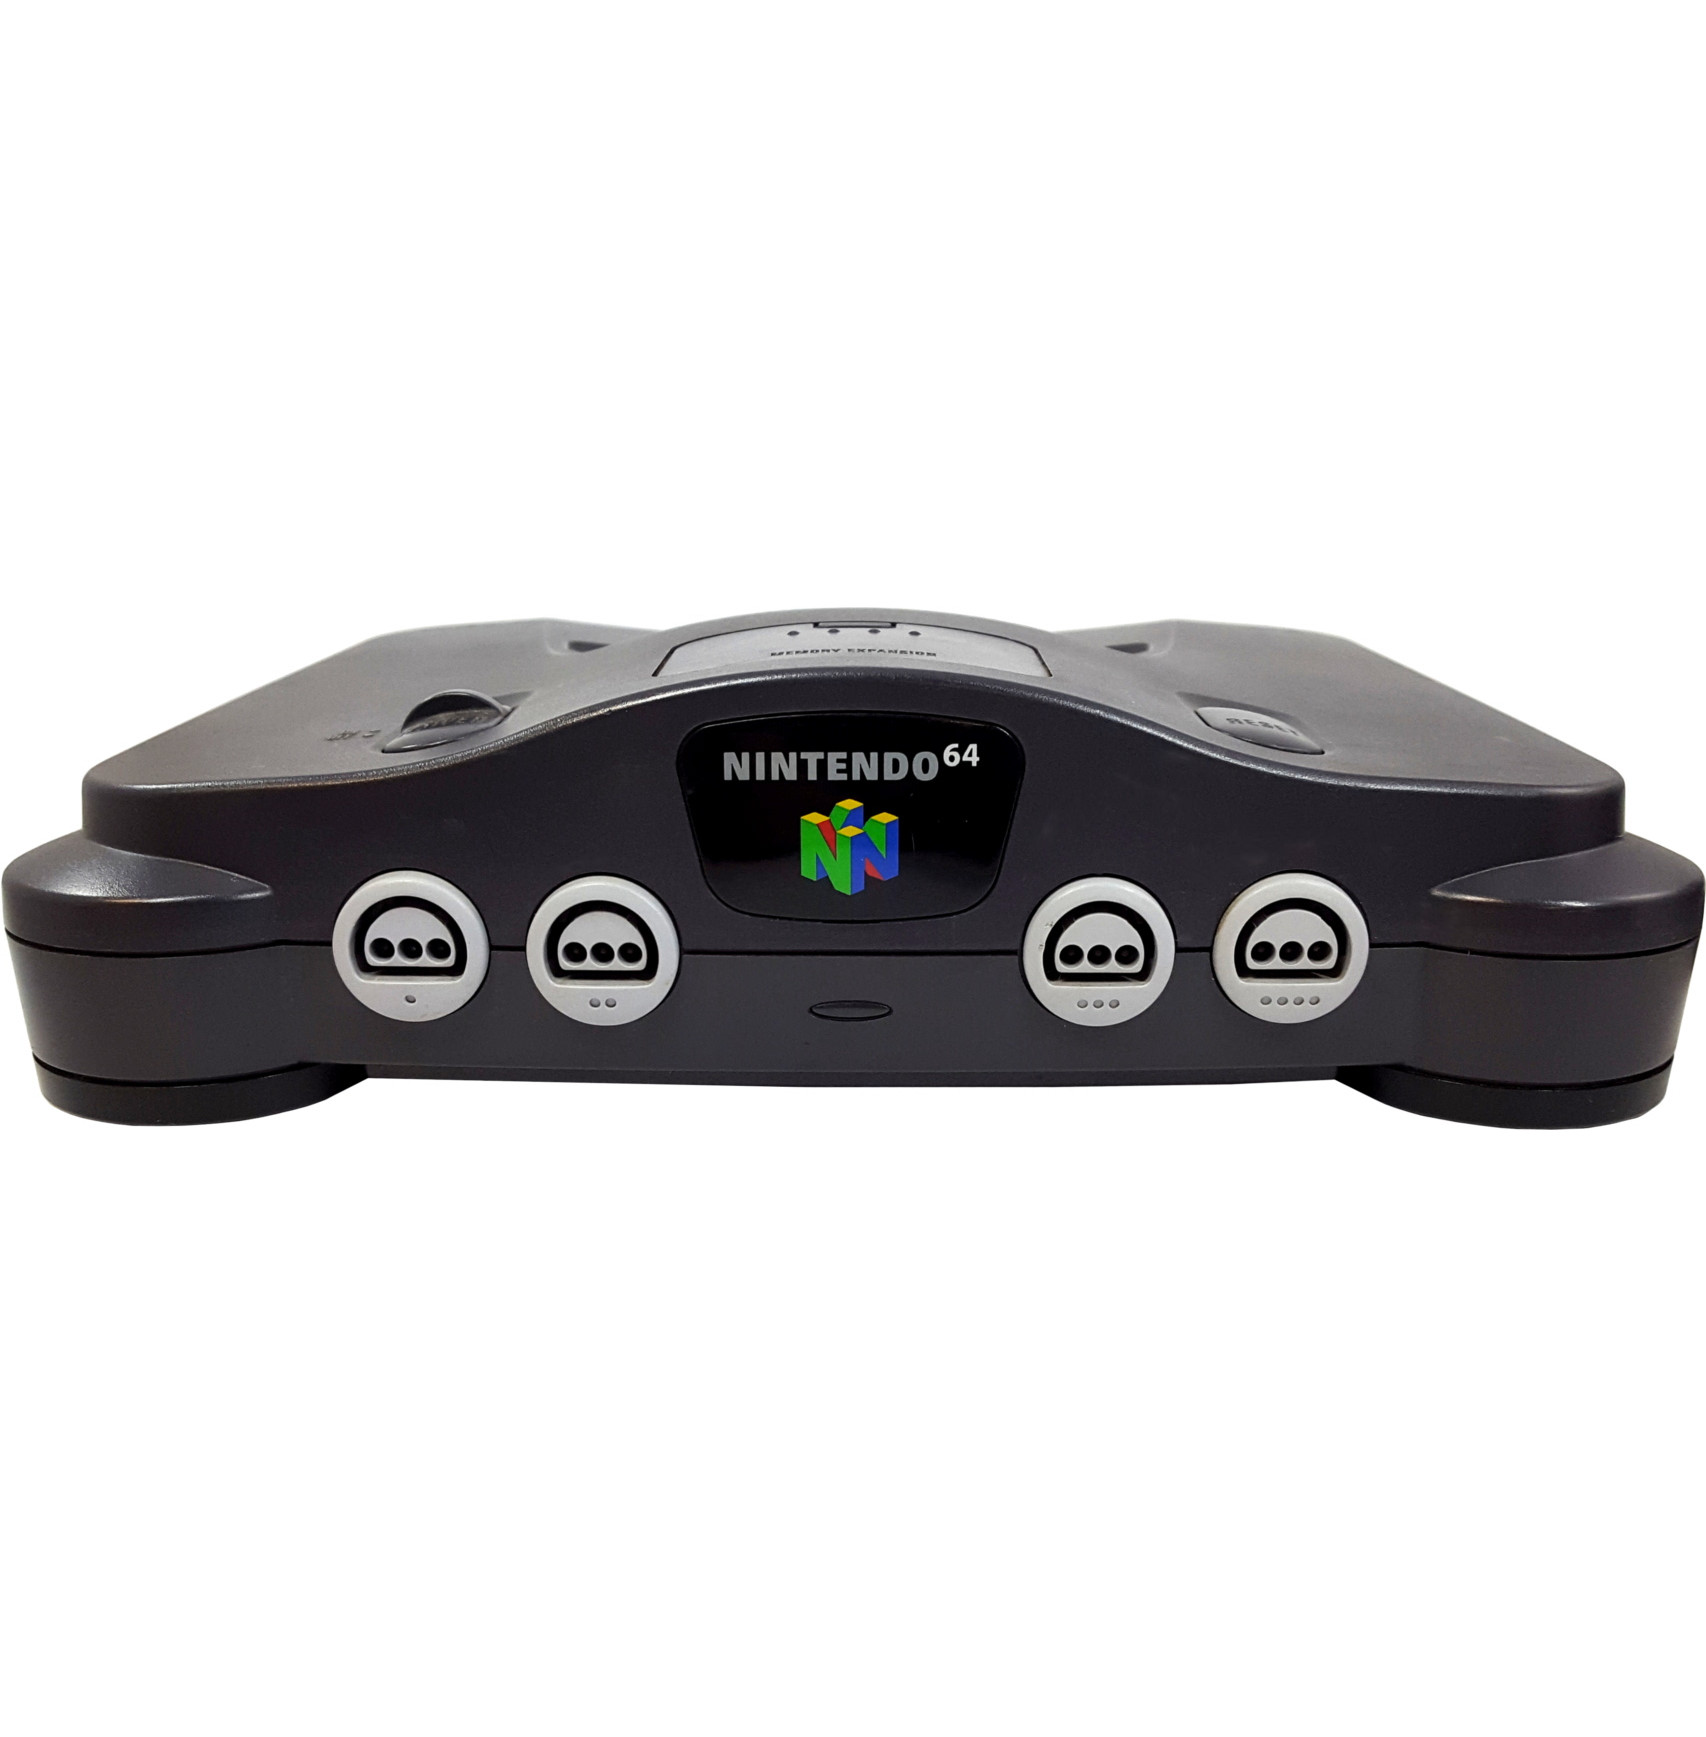 Nintendo 64 N64 Video Game Console with Matching Controller and Cables - image 4 of 4